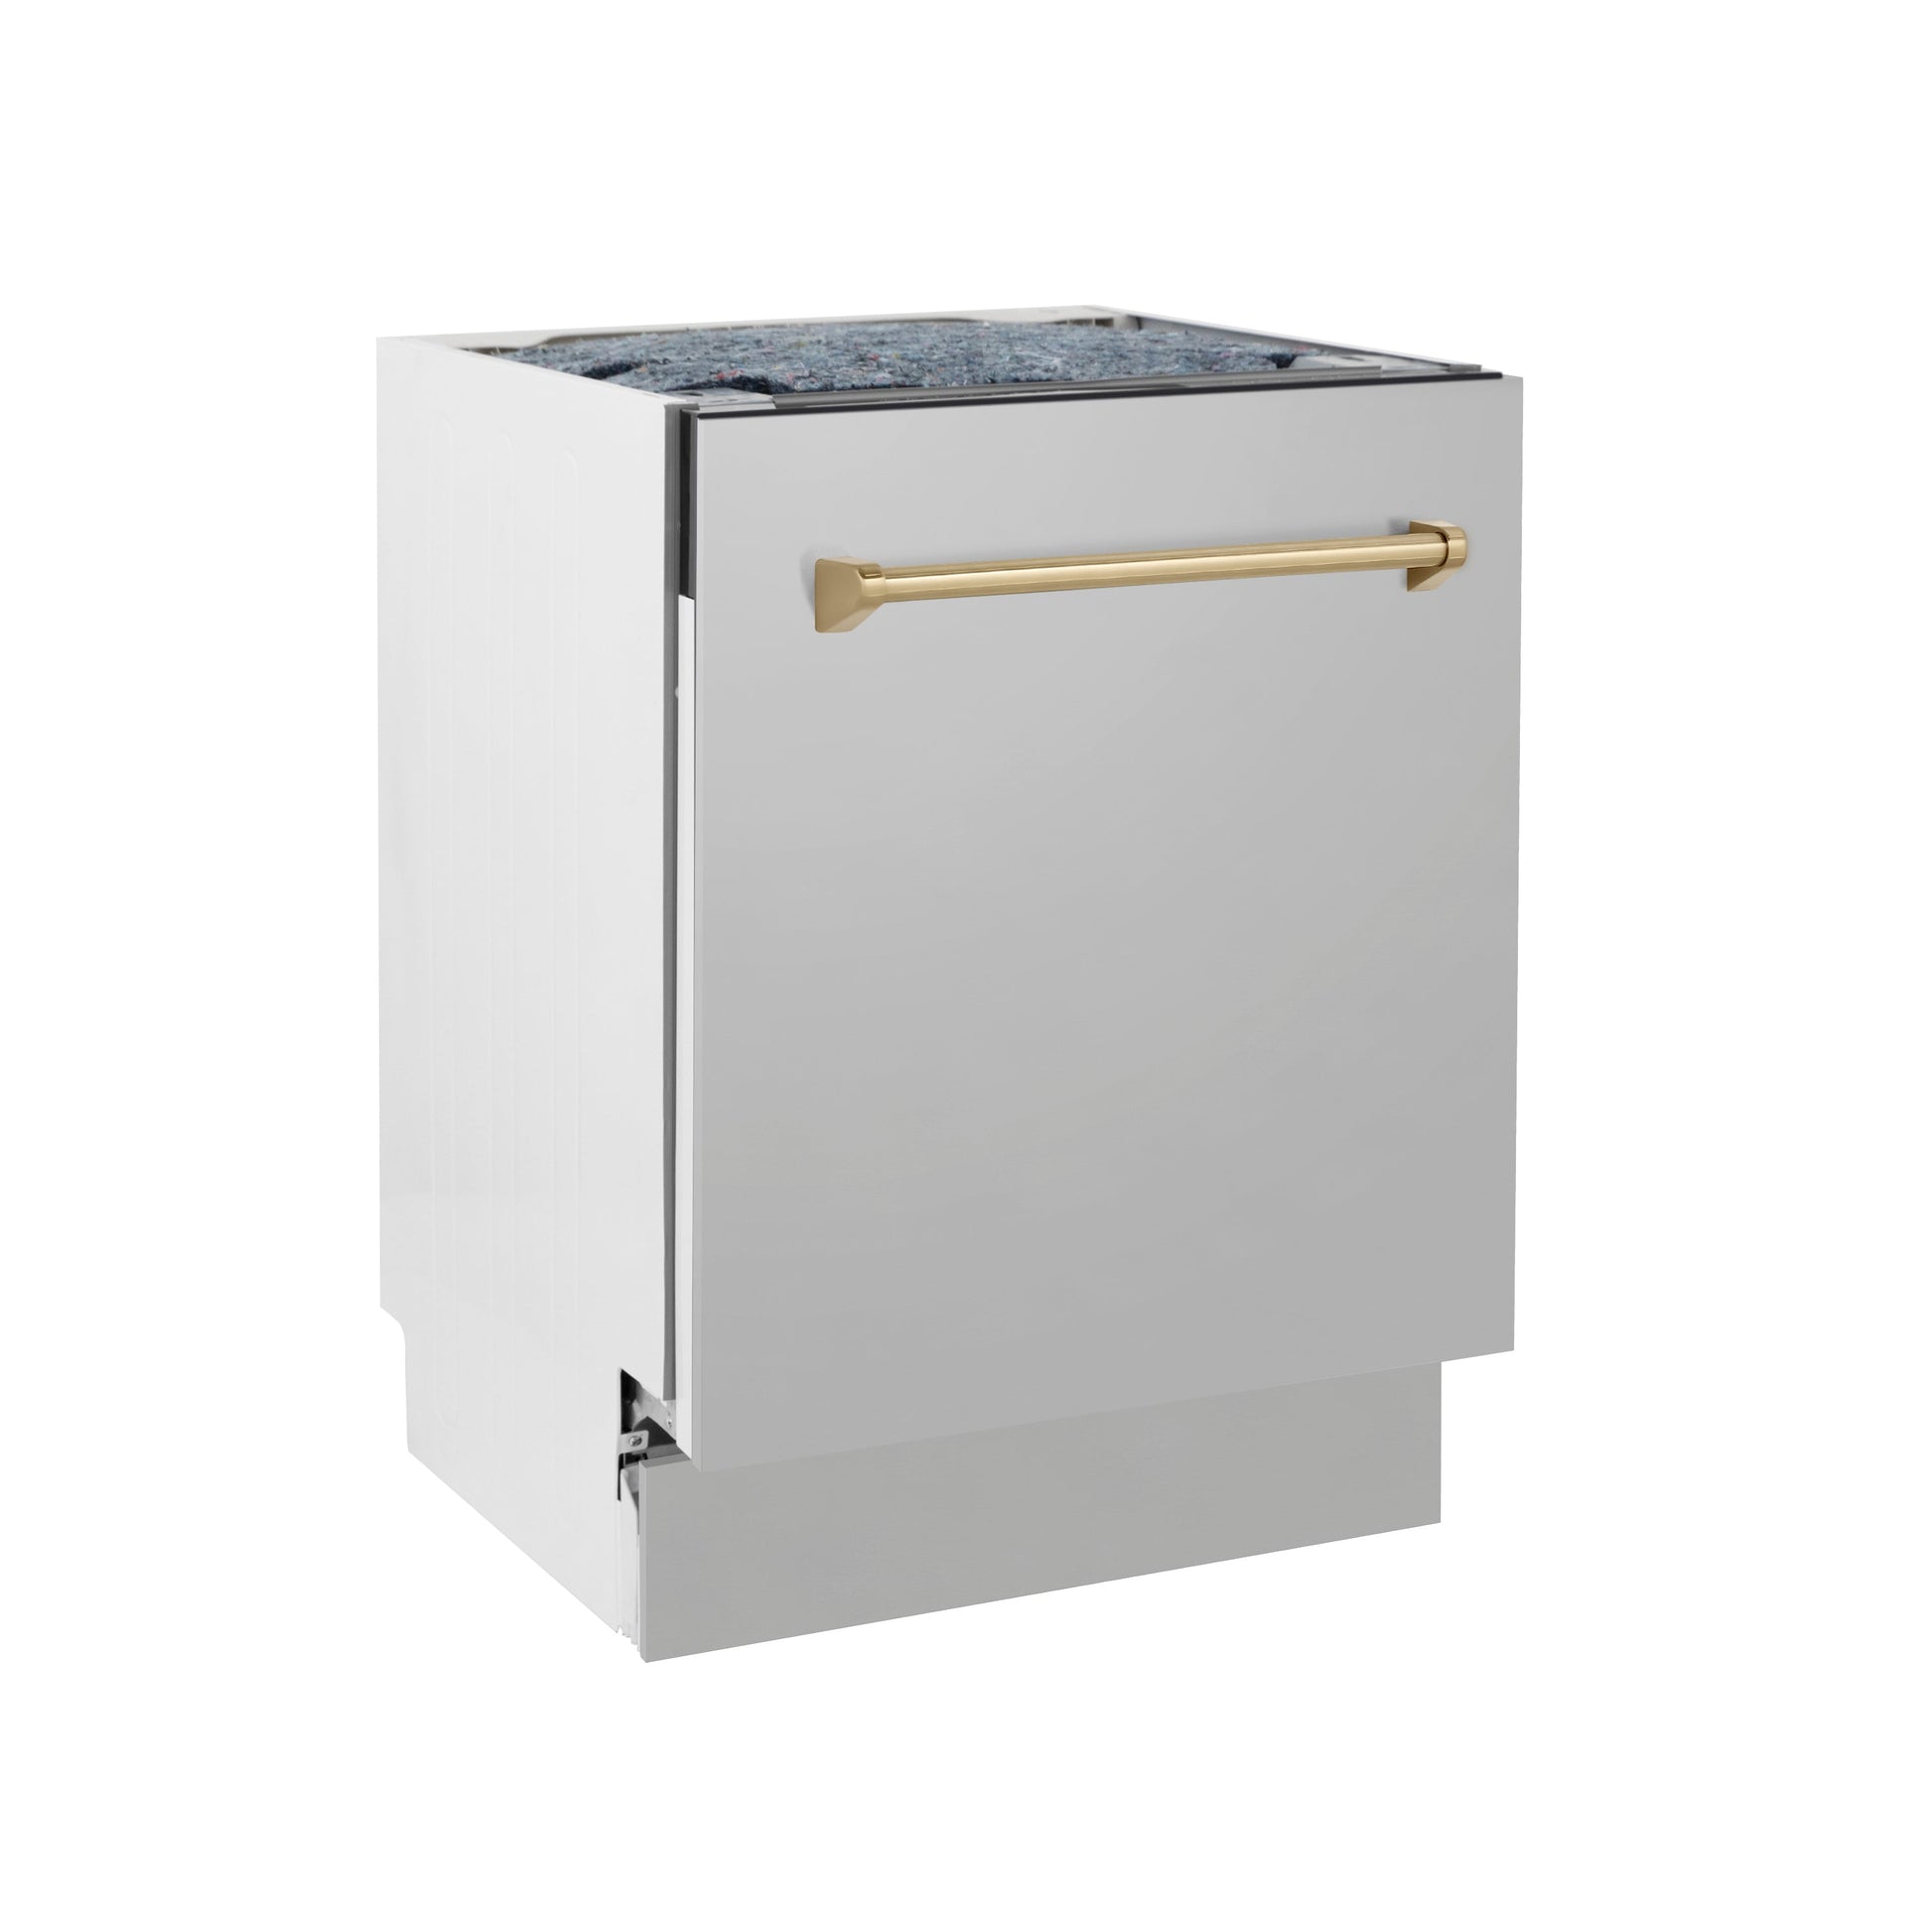 ZLINE Autograph Edition 24 in. 3rd Rack Top Control Tall Tub Dishwasher in Stainless Steel with Champagne Bronze Handle, 51dBa (DWVZ-304-24-CB) side, closed.